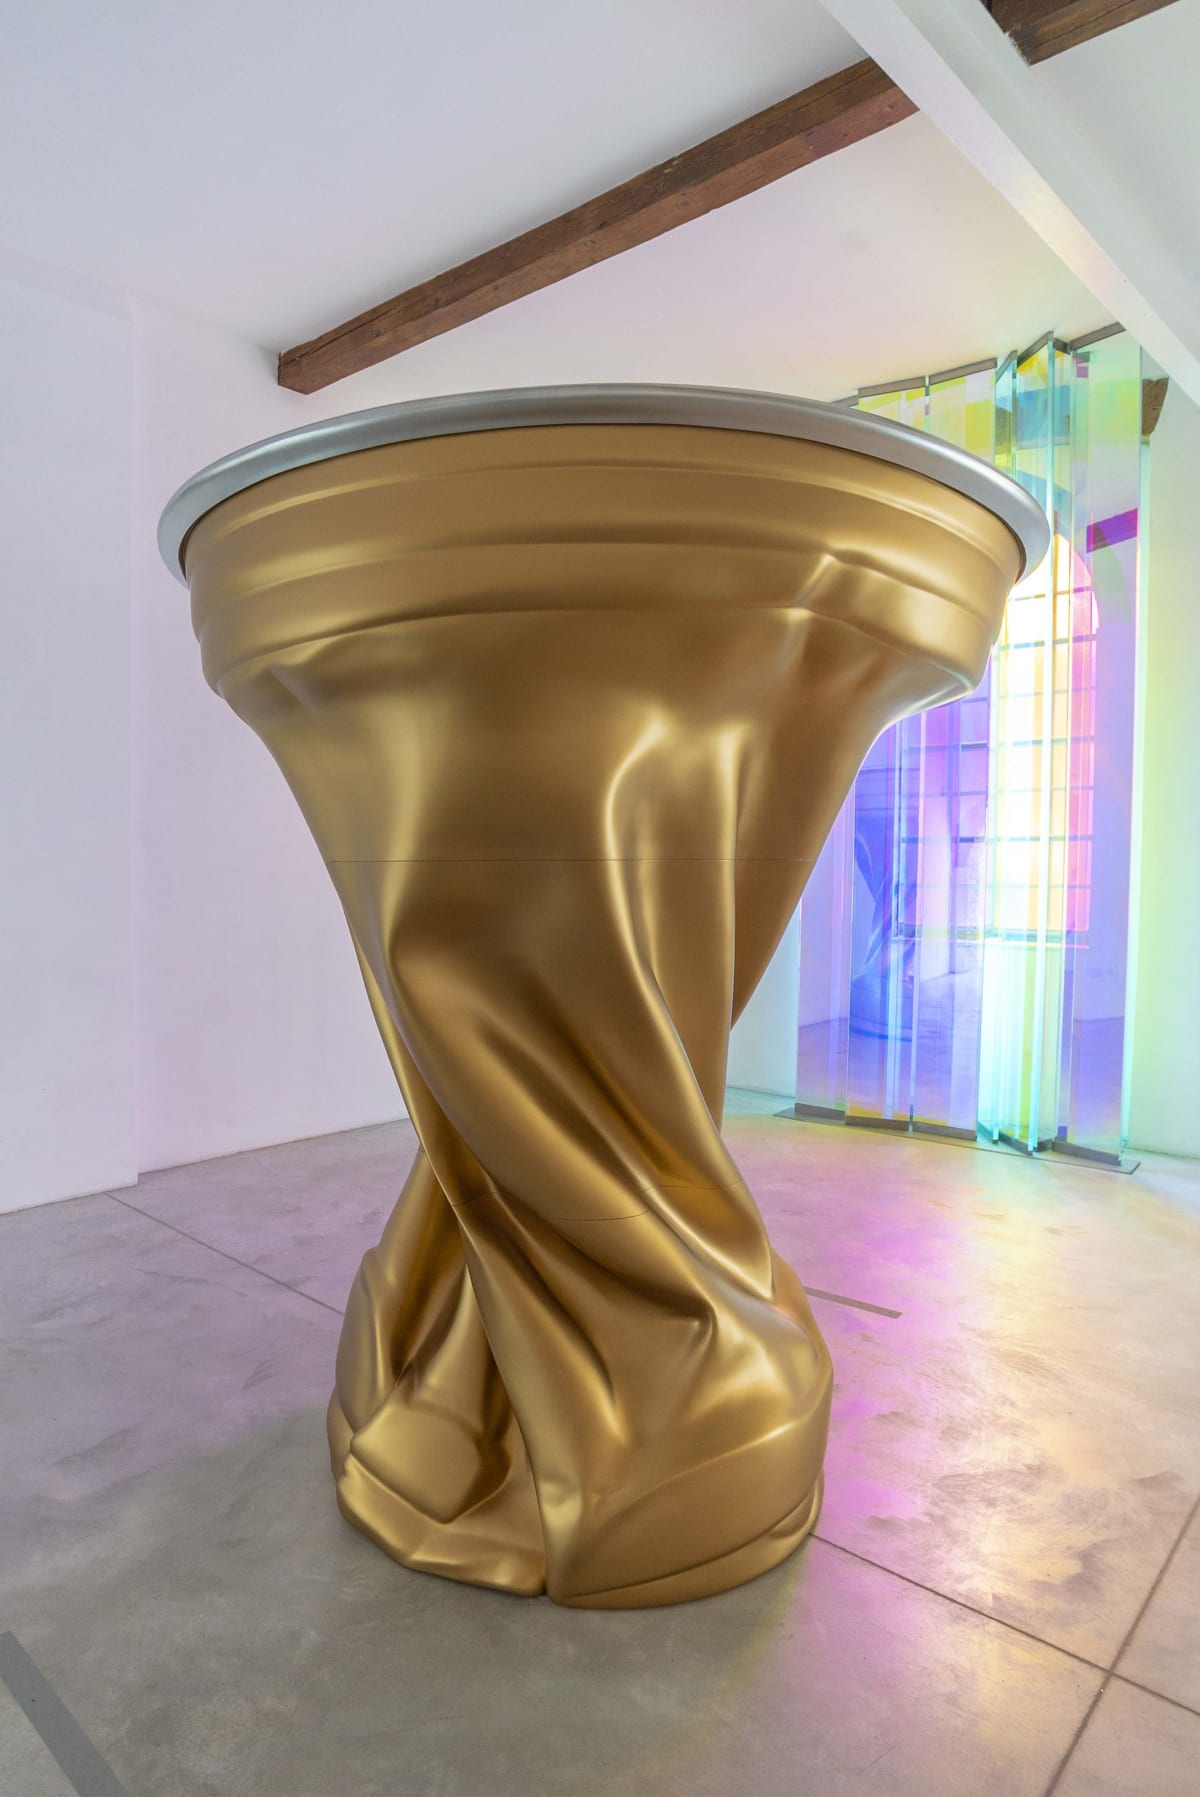 Paula Crown's SOLO Cup Sculpture Brings Miami Together for the Beaches